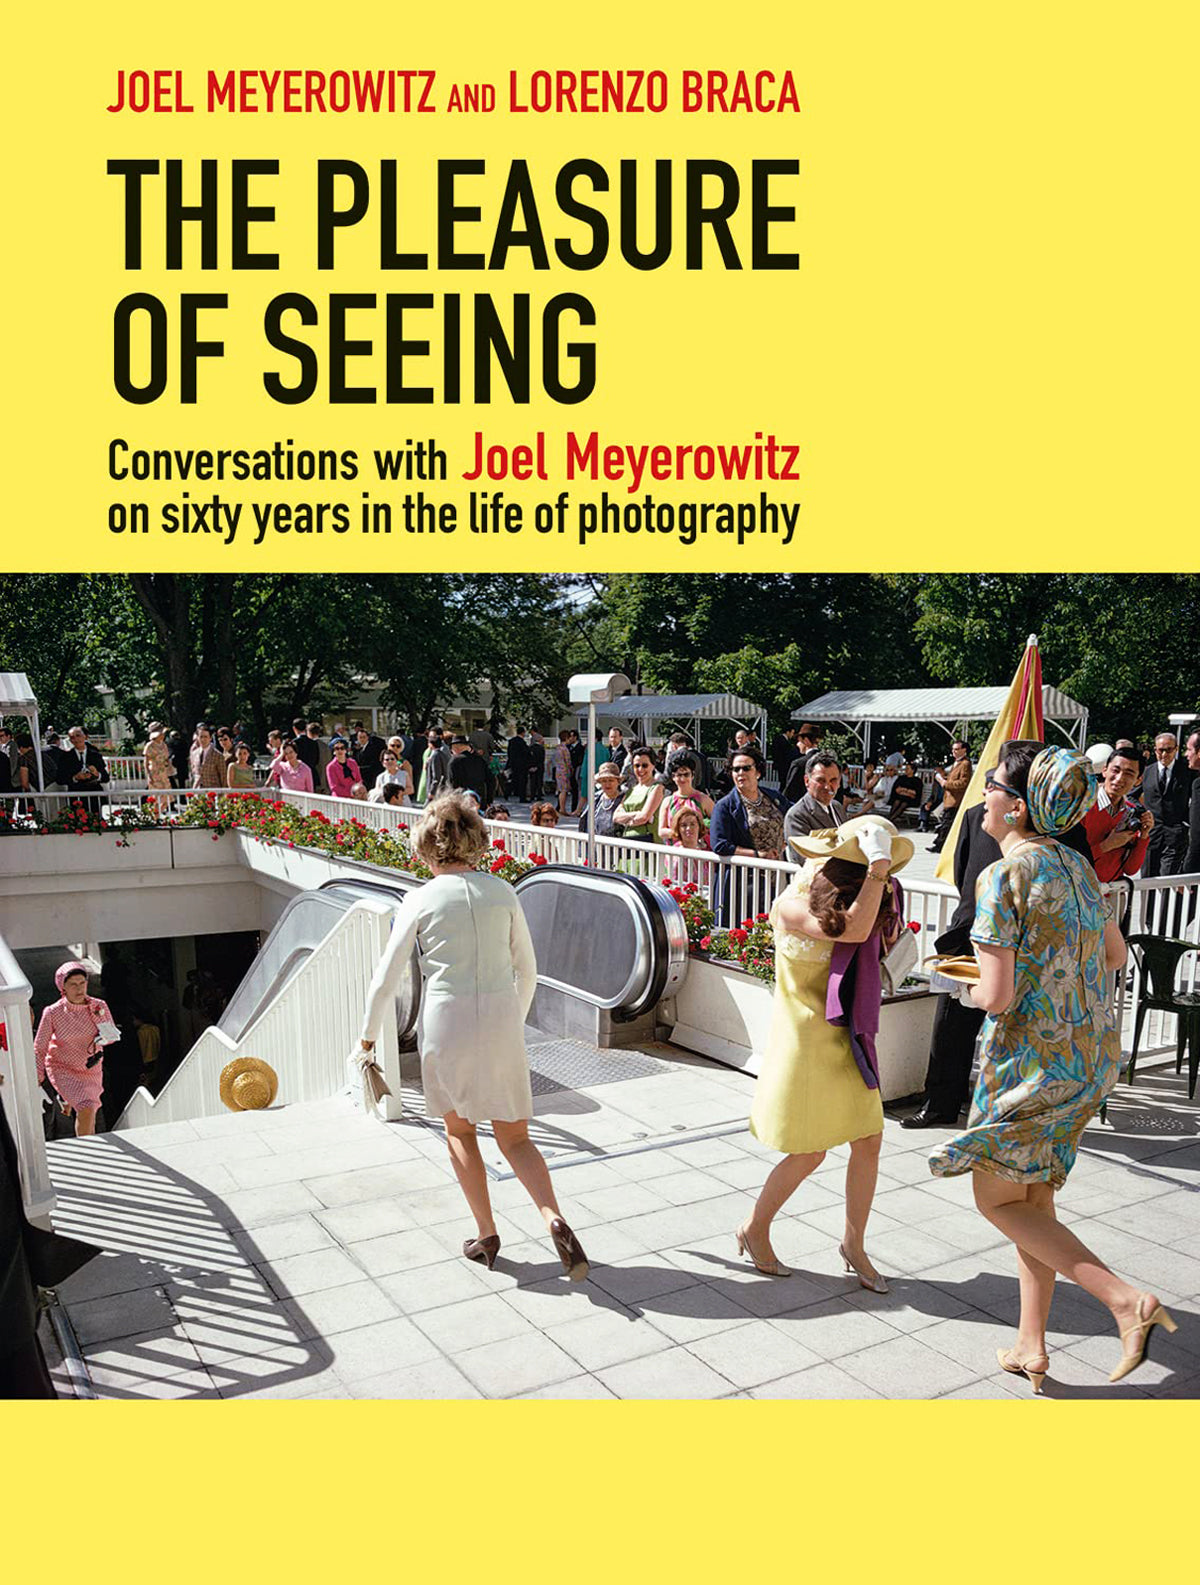 The Pleasure of Seeing Conversations on Joel Meyerowitzs sixty years in the life of photography